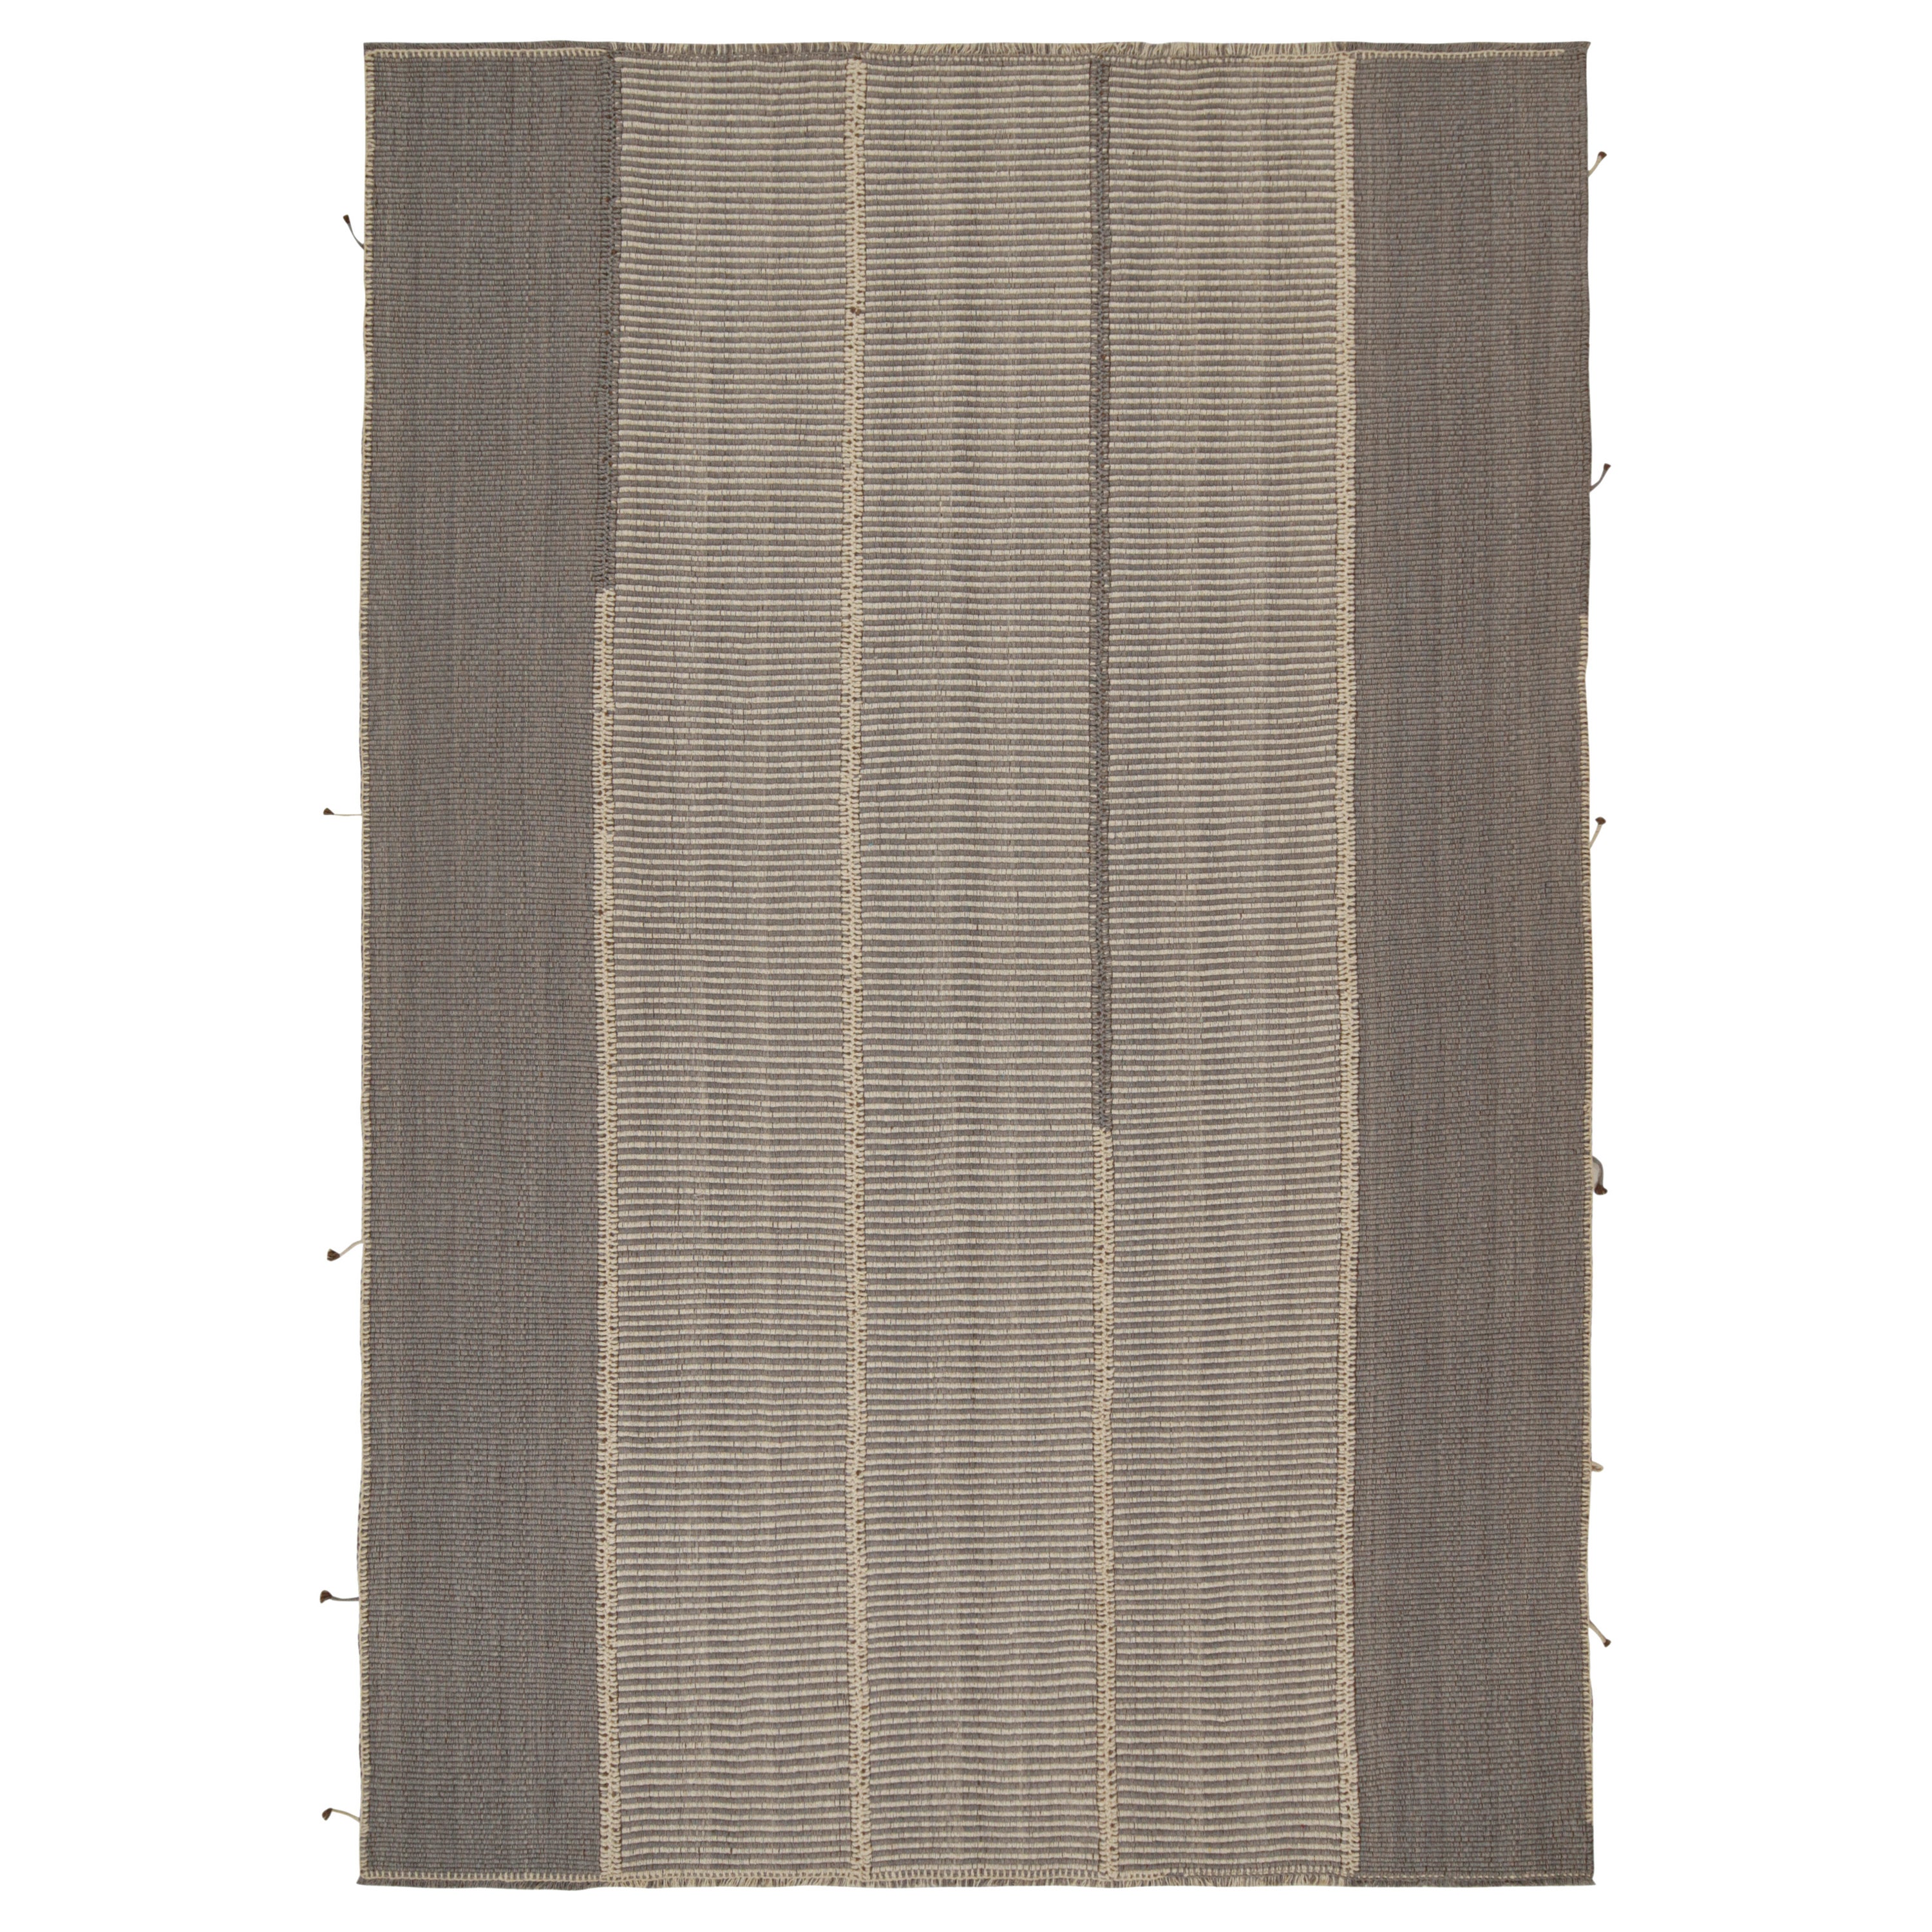 Rug & Kilim’s Contemporary Kilim in Gray and Beige Stripes with Brown Accents